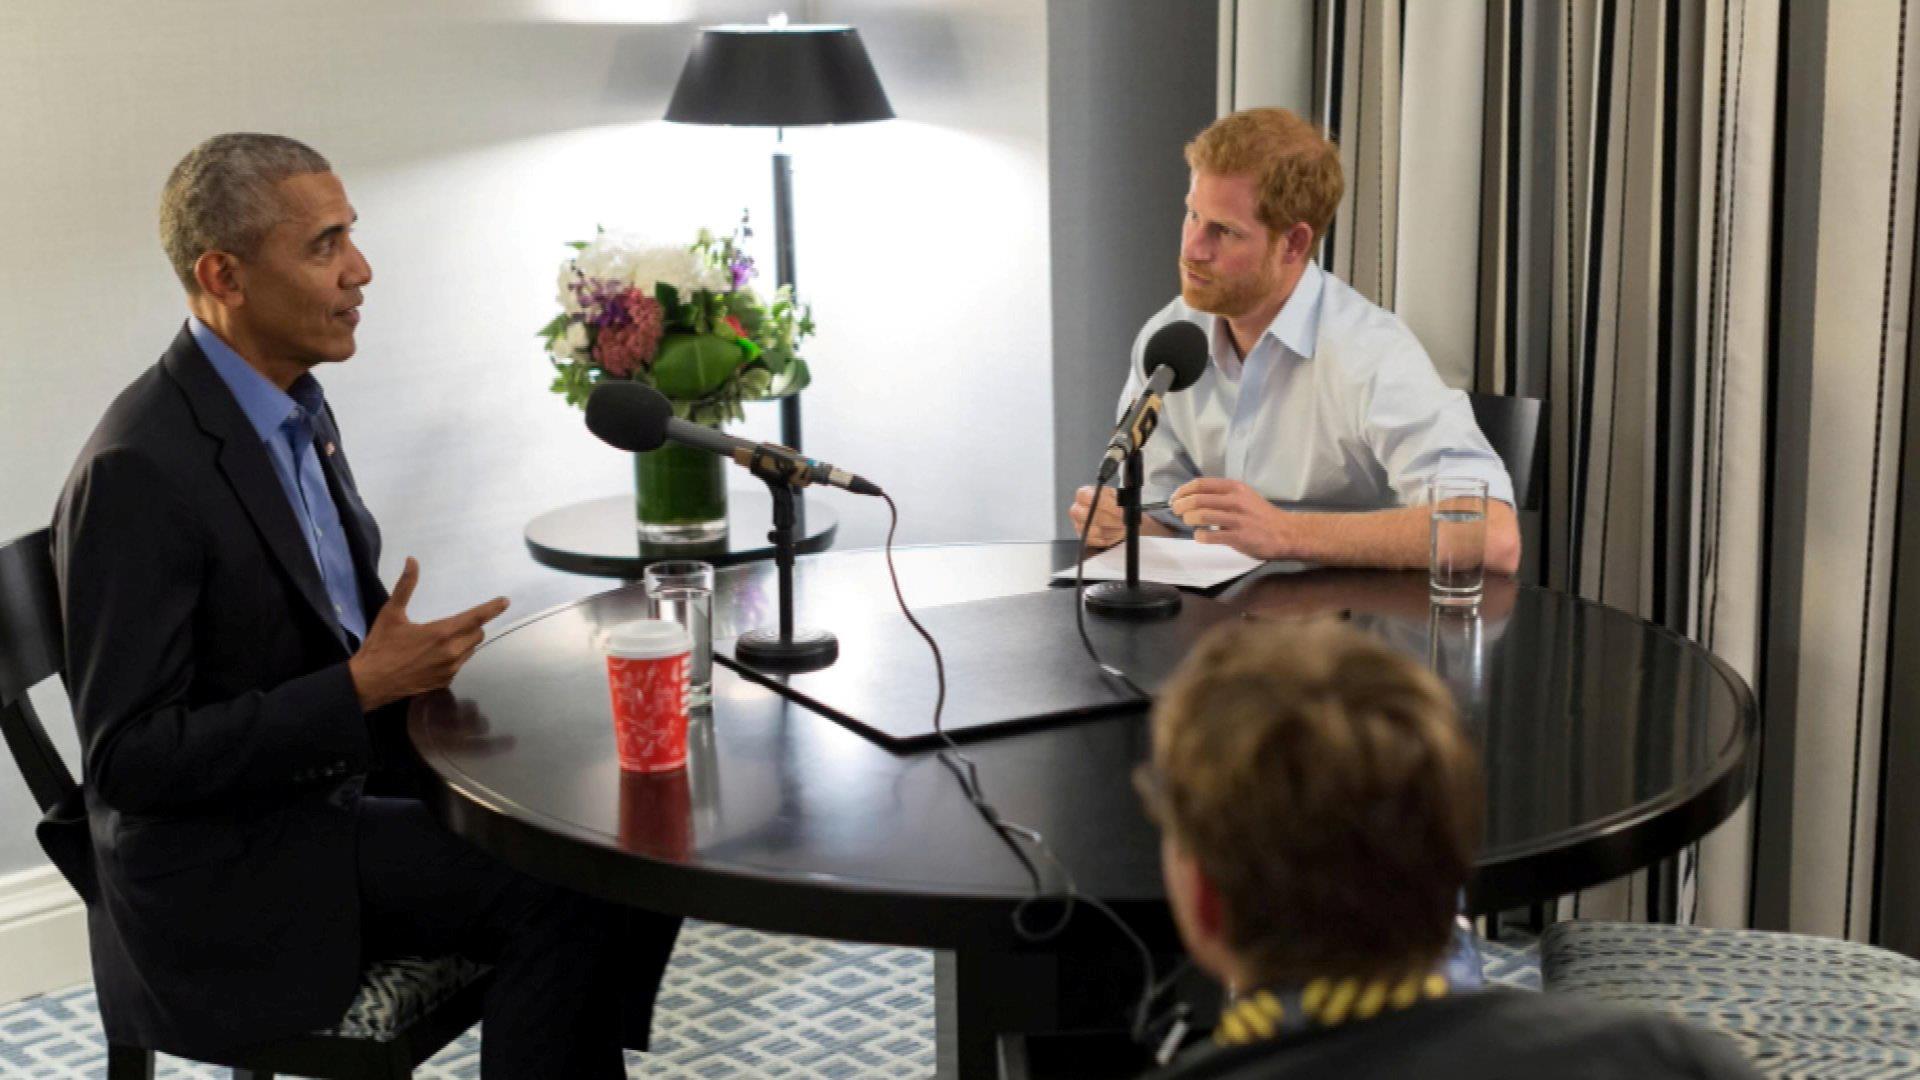 Prince Harry's interview with Obama released amid Meghan Markle mania